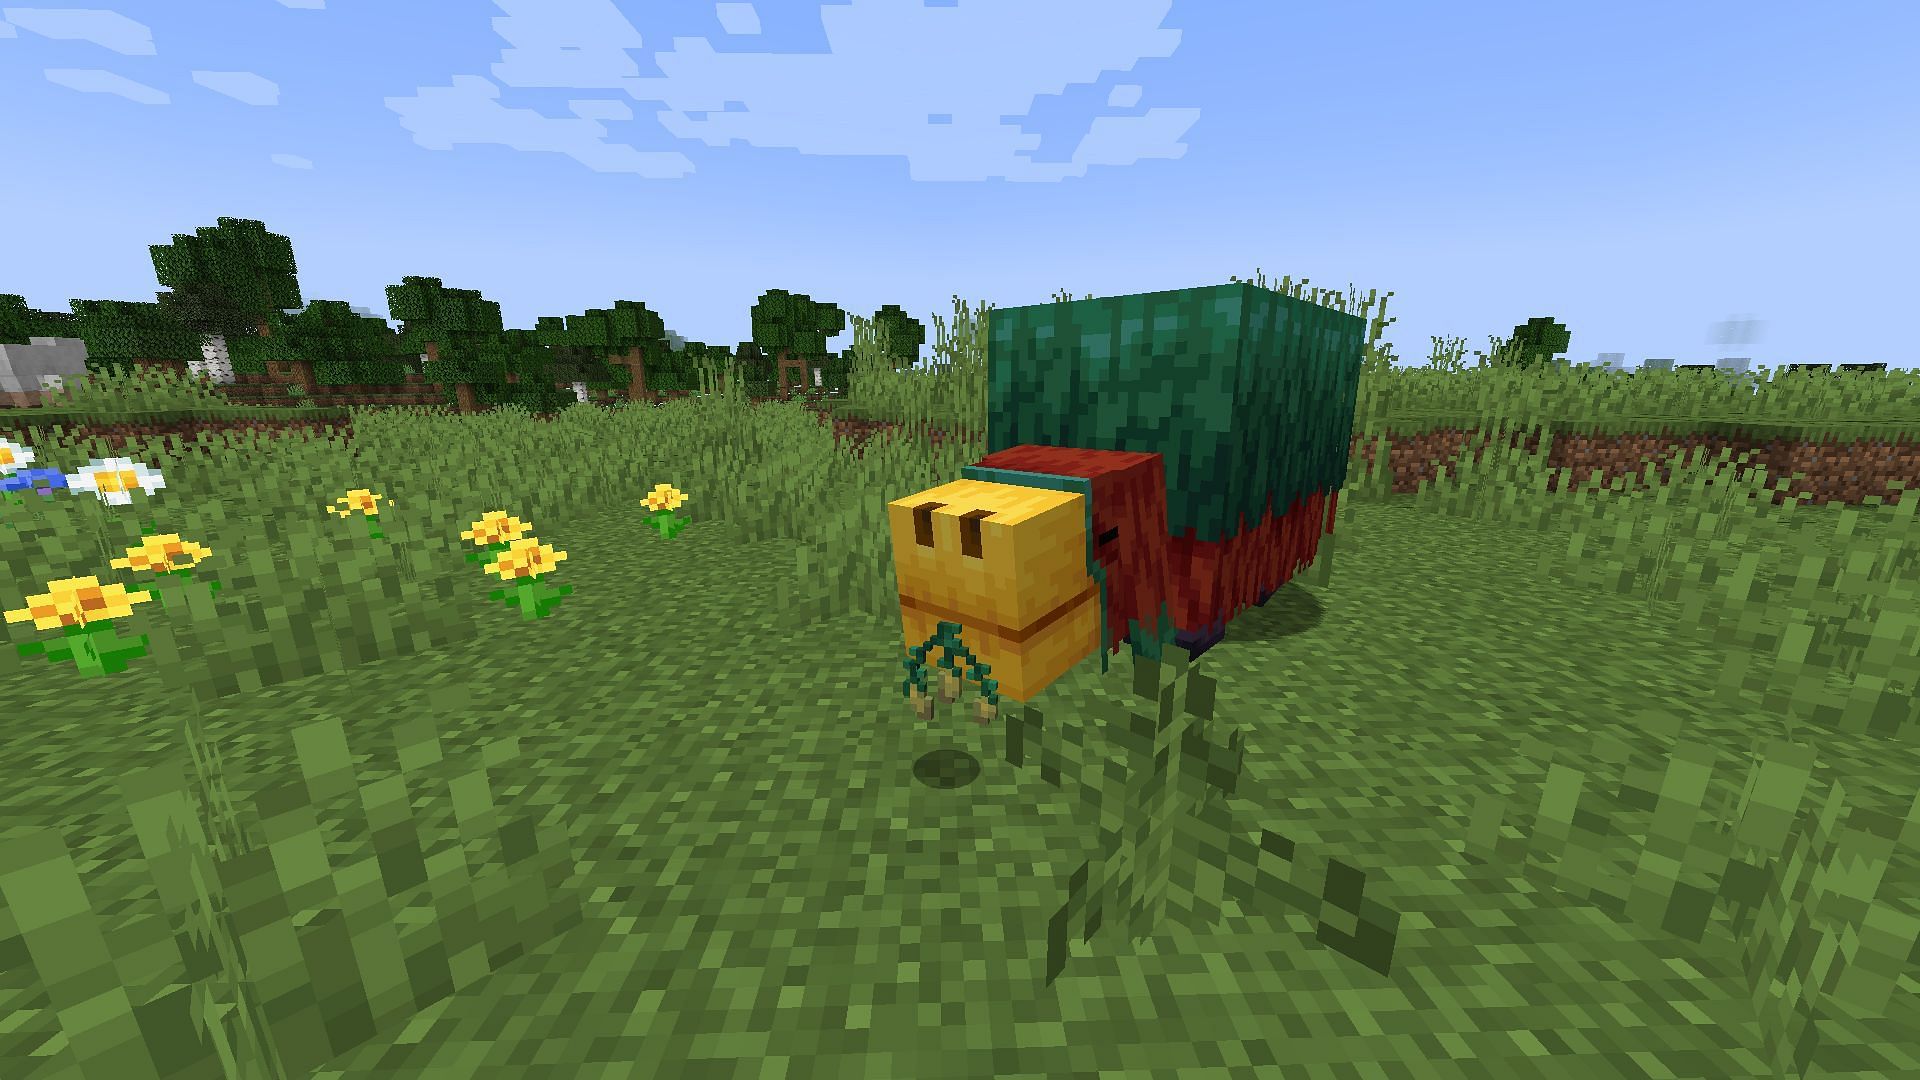 Sniffer is also a cute mob that will be released in the Minecraft 1.20 update (Image via Mojang)